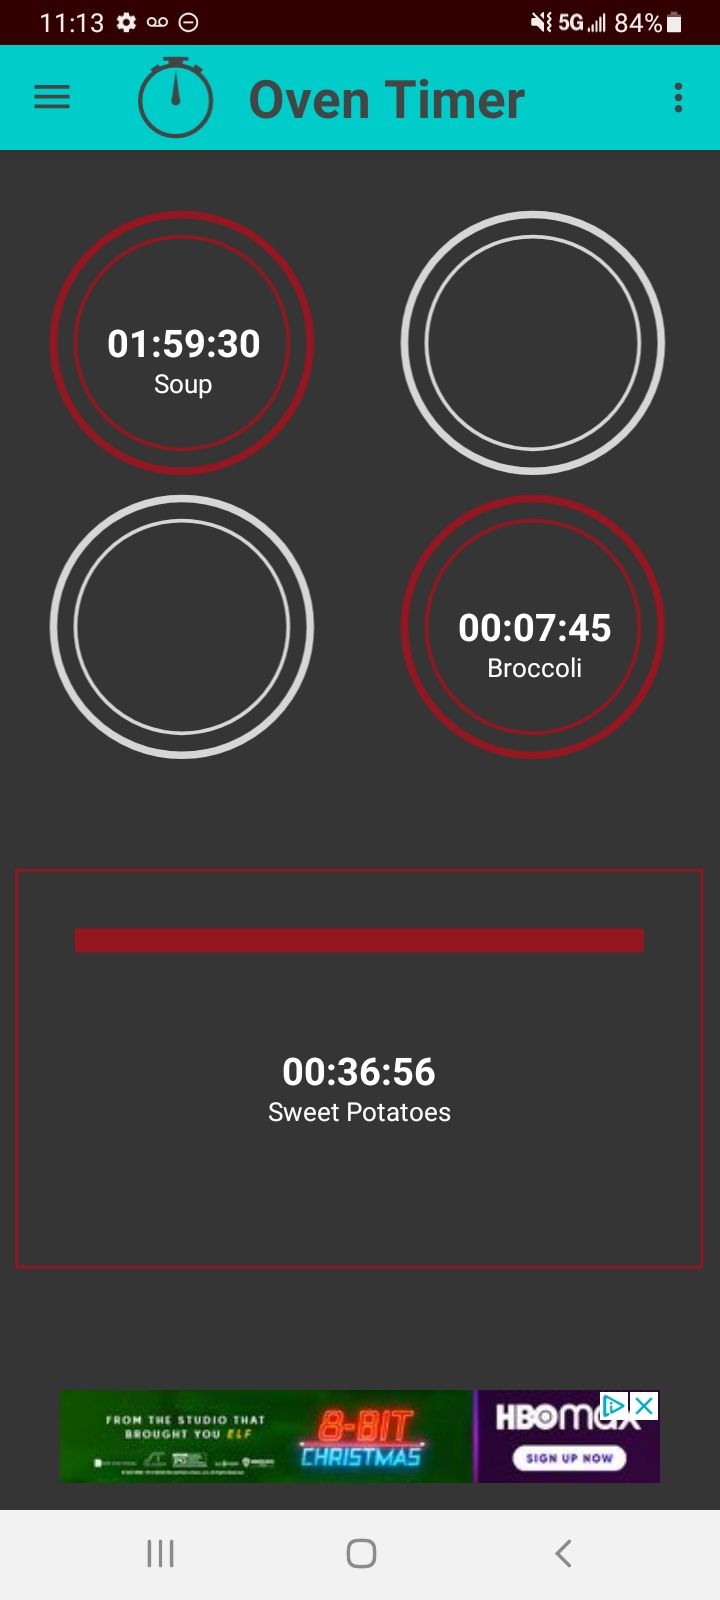 A few timers in the Oven Timer app.